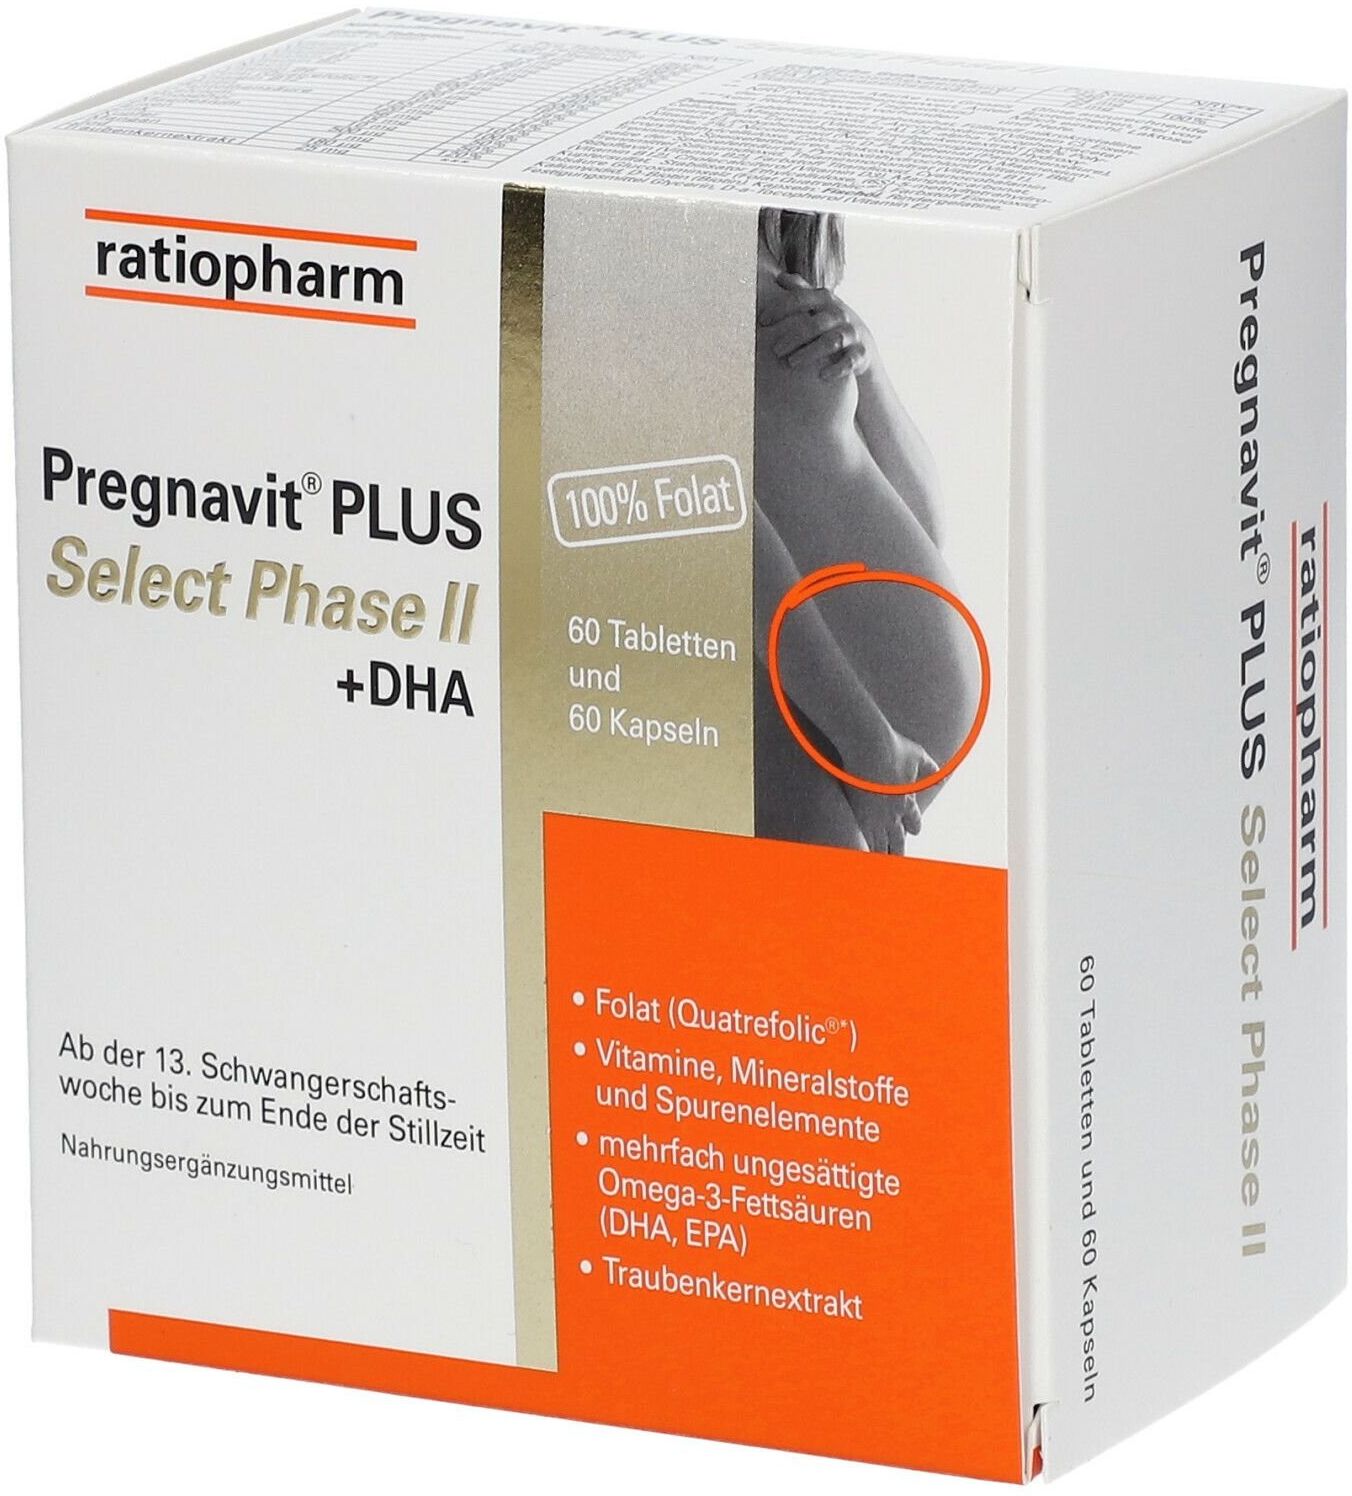 Pregnavit PLUS Select Phase II +DHA  Tagesportionen 60 Stk.